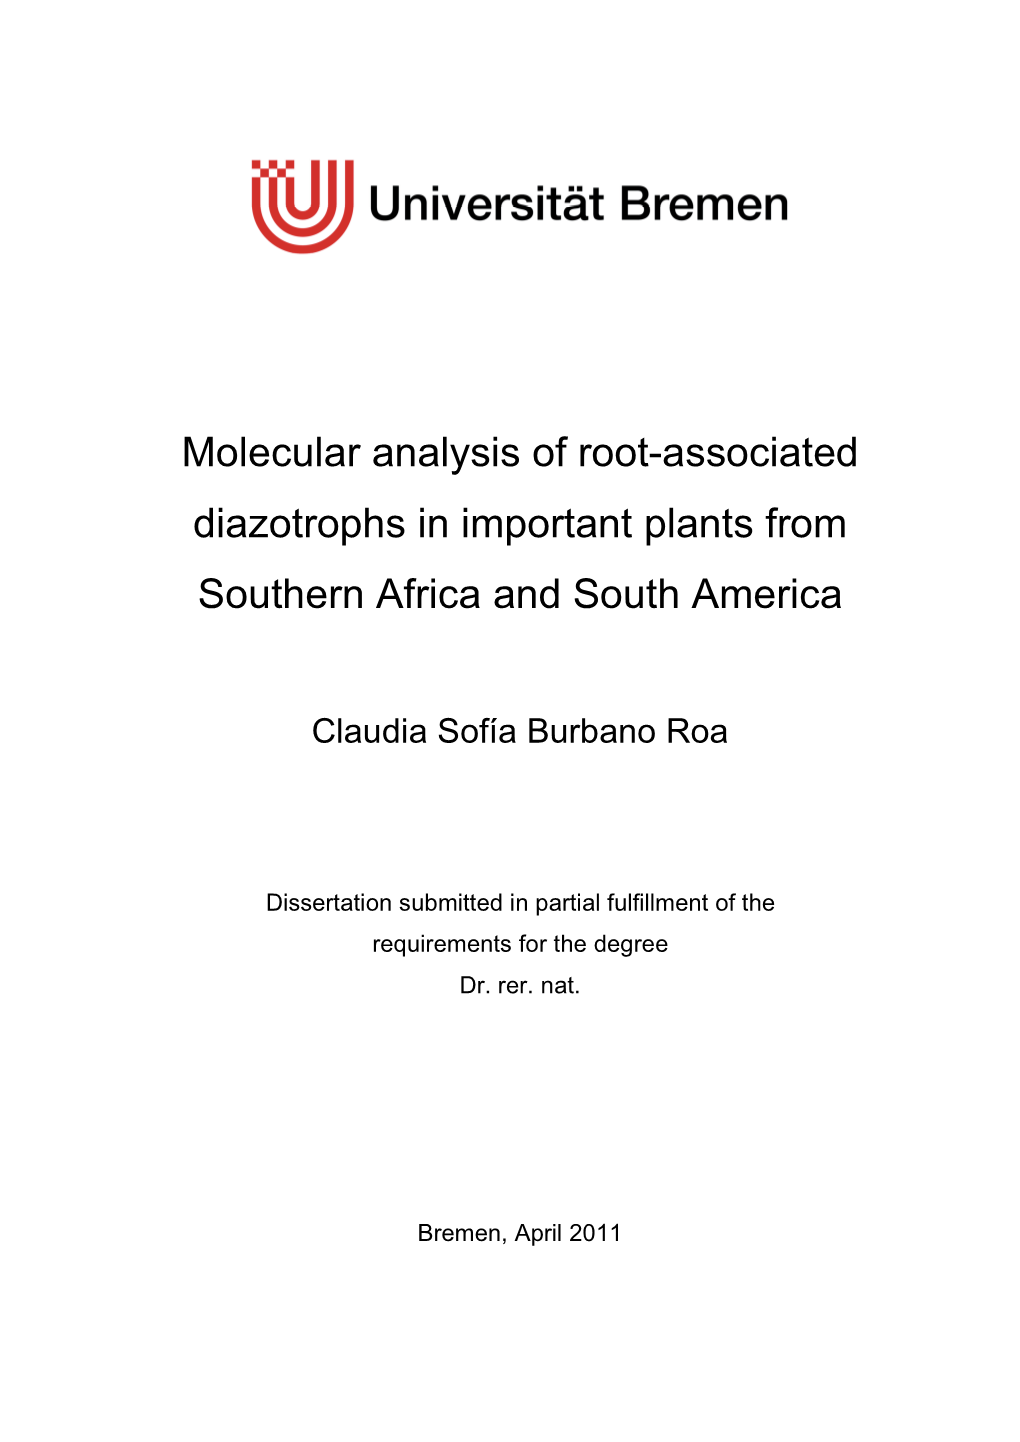 Molecular Analysis of Root-Associated Diazotrophs in Important Plants from Southern Africa and South America